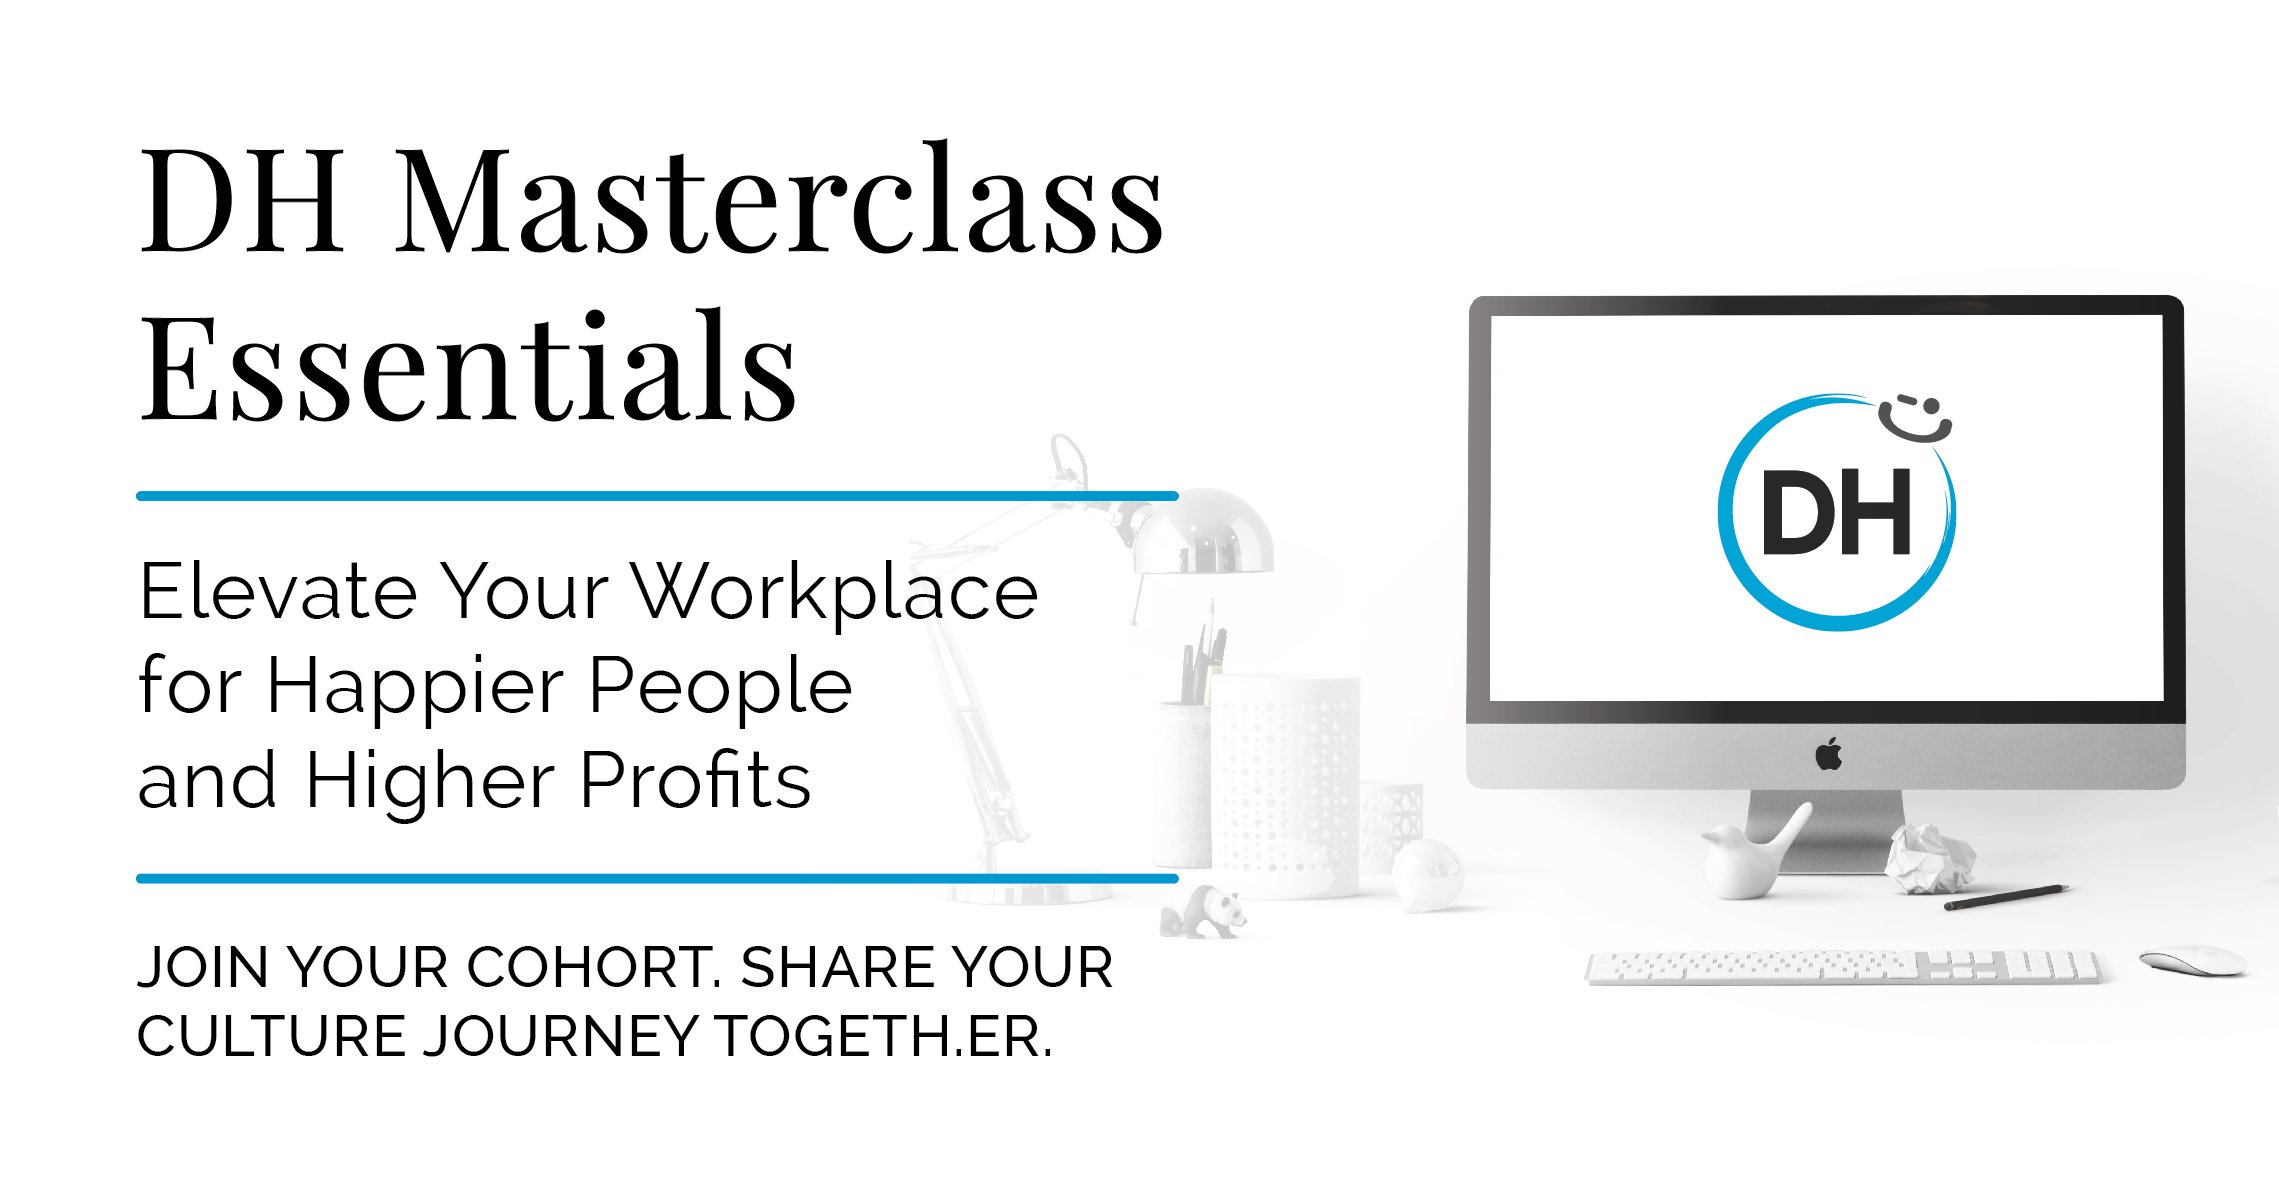 DH Masterclass Essentials, This course is ideal for C-level executives, business owners, and culture leaders committed to building a sustainable culture of happiness at work.